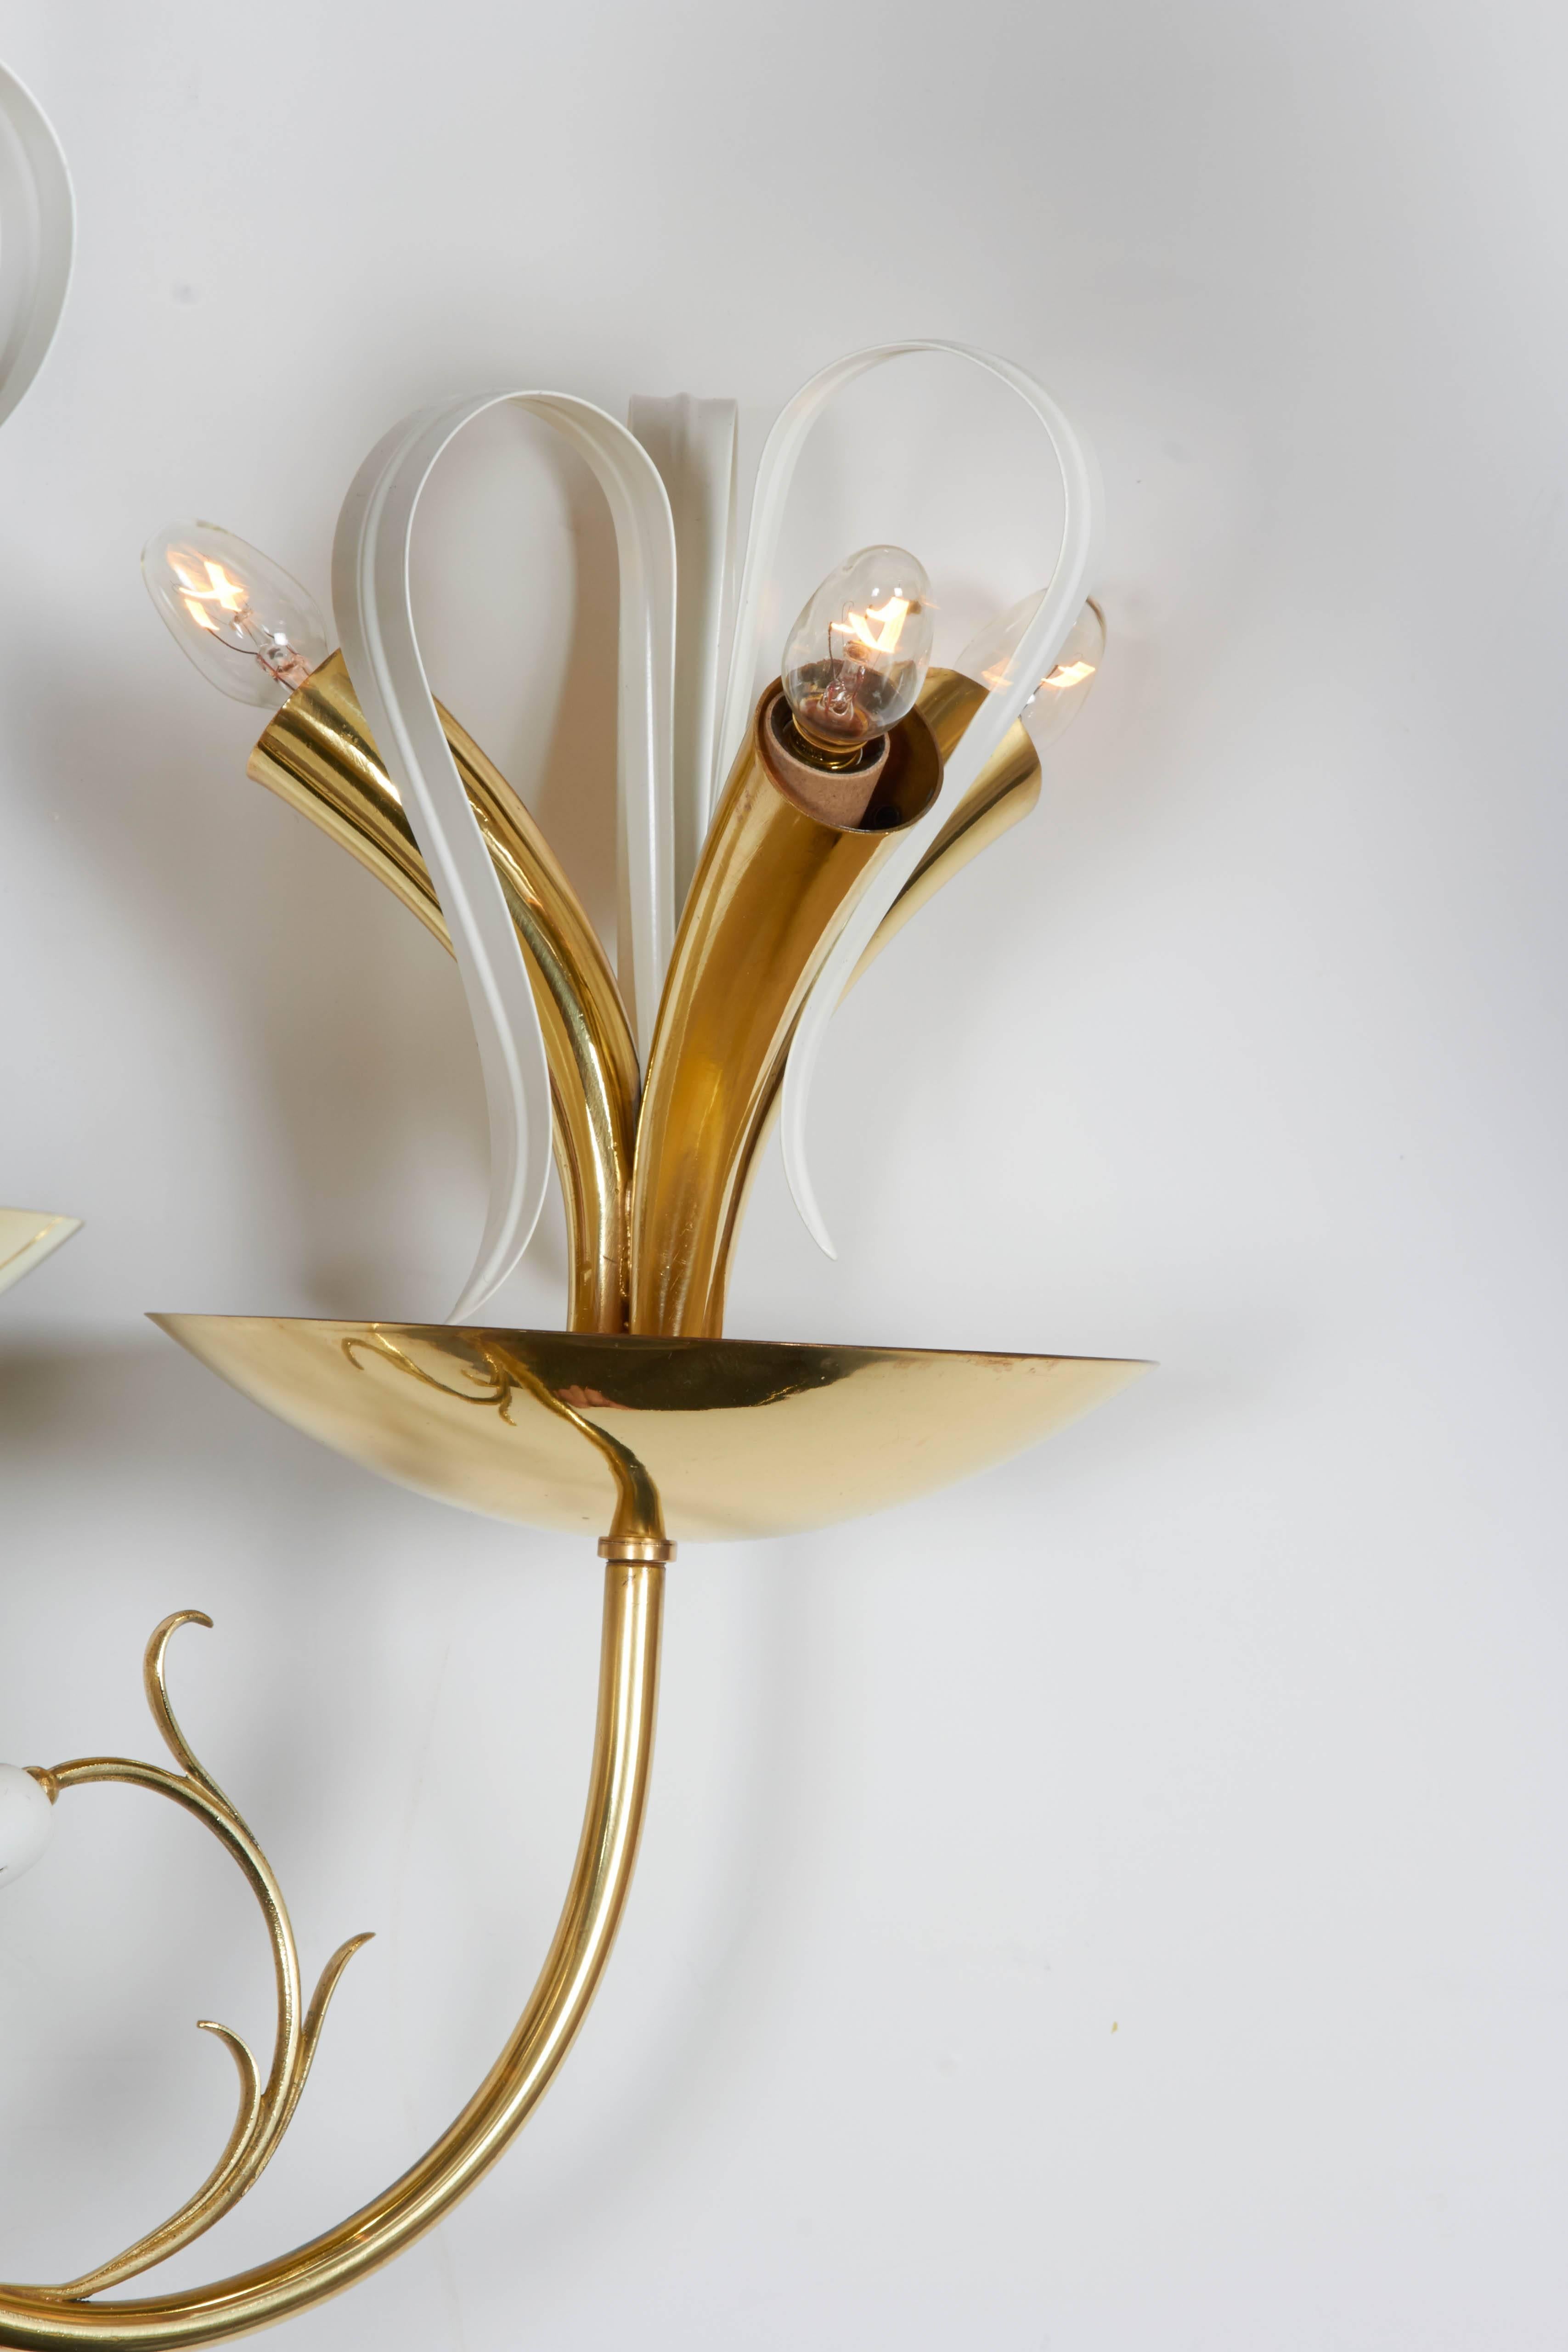 A marvelous, cheerful and optimistic example of post war mid-1940s to early 1950s lighting design. The body of the chandelier is made in brass with white enamel metal flower bud and leaf accents. Each arm supports a dish with three curved cone